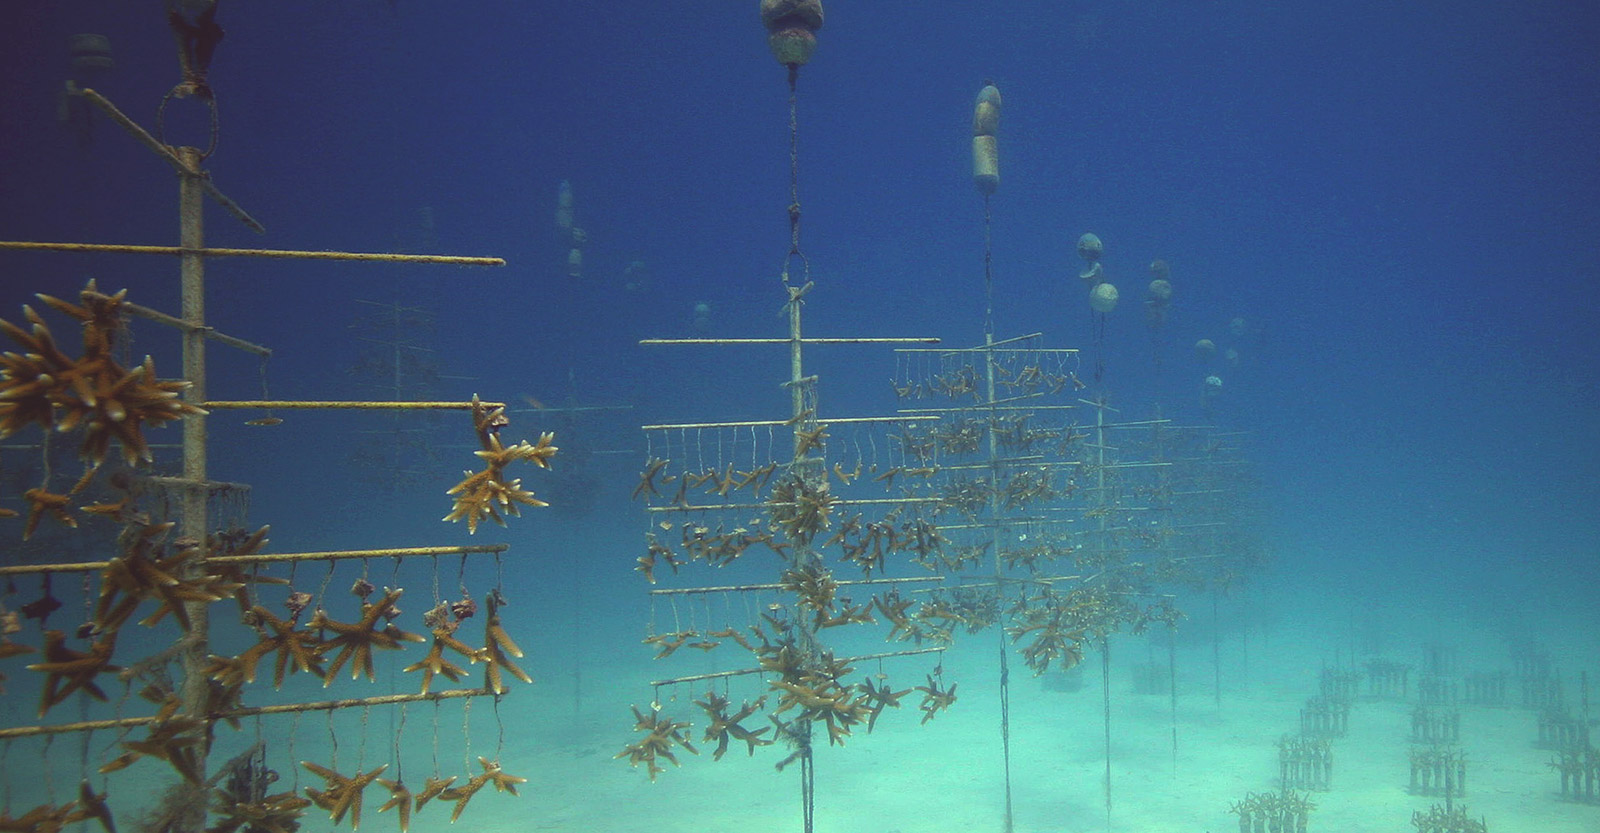 The Coral Restoration Foundation's nursery is made up of PVC-pipe "trees" where corals grow quickly in the nutrient-rich current.